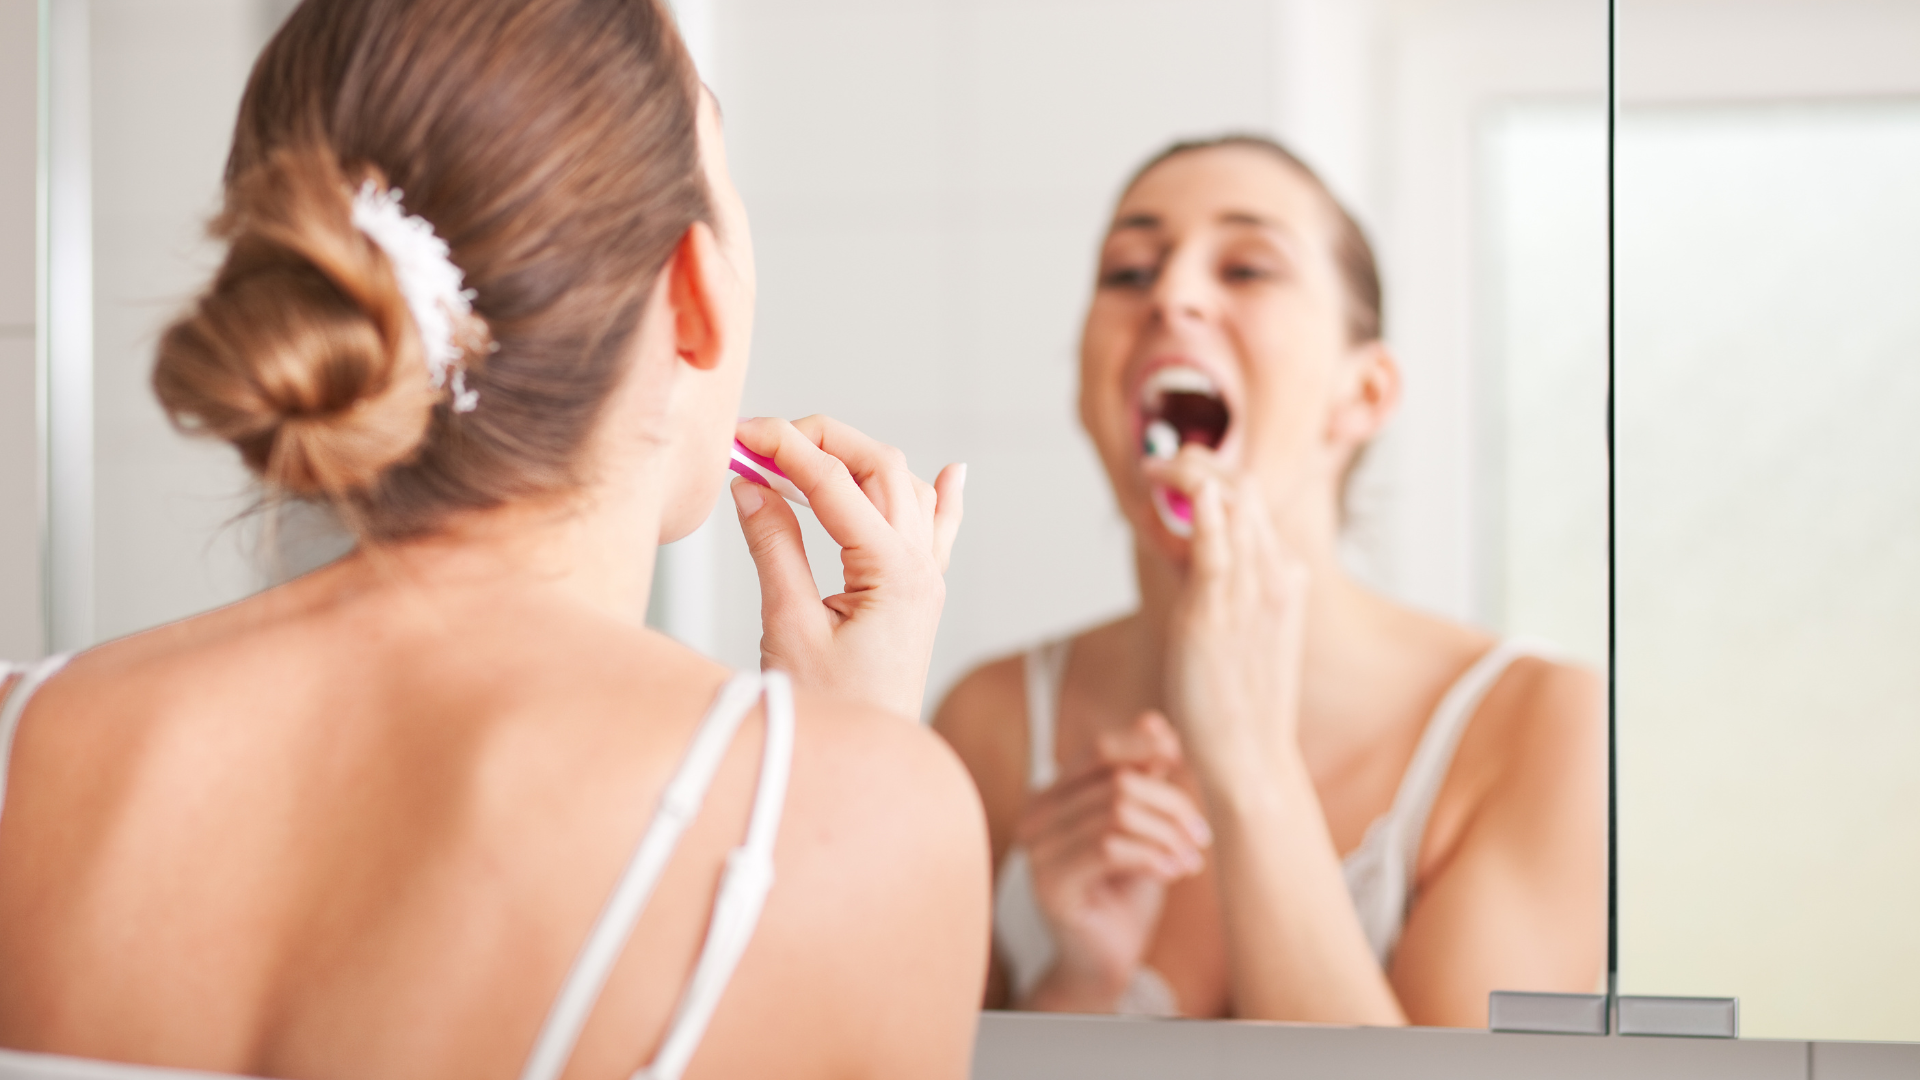 Man and woman brushing teeth prevent dental staining